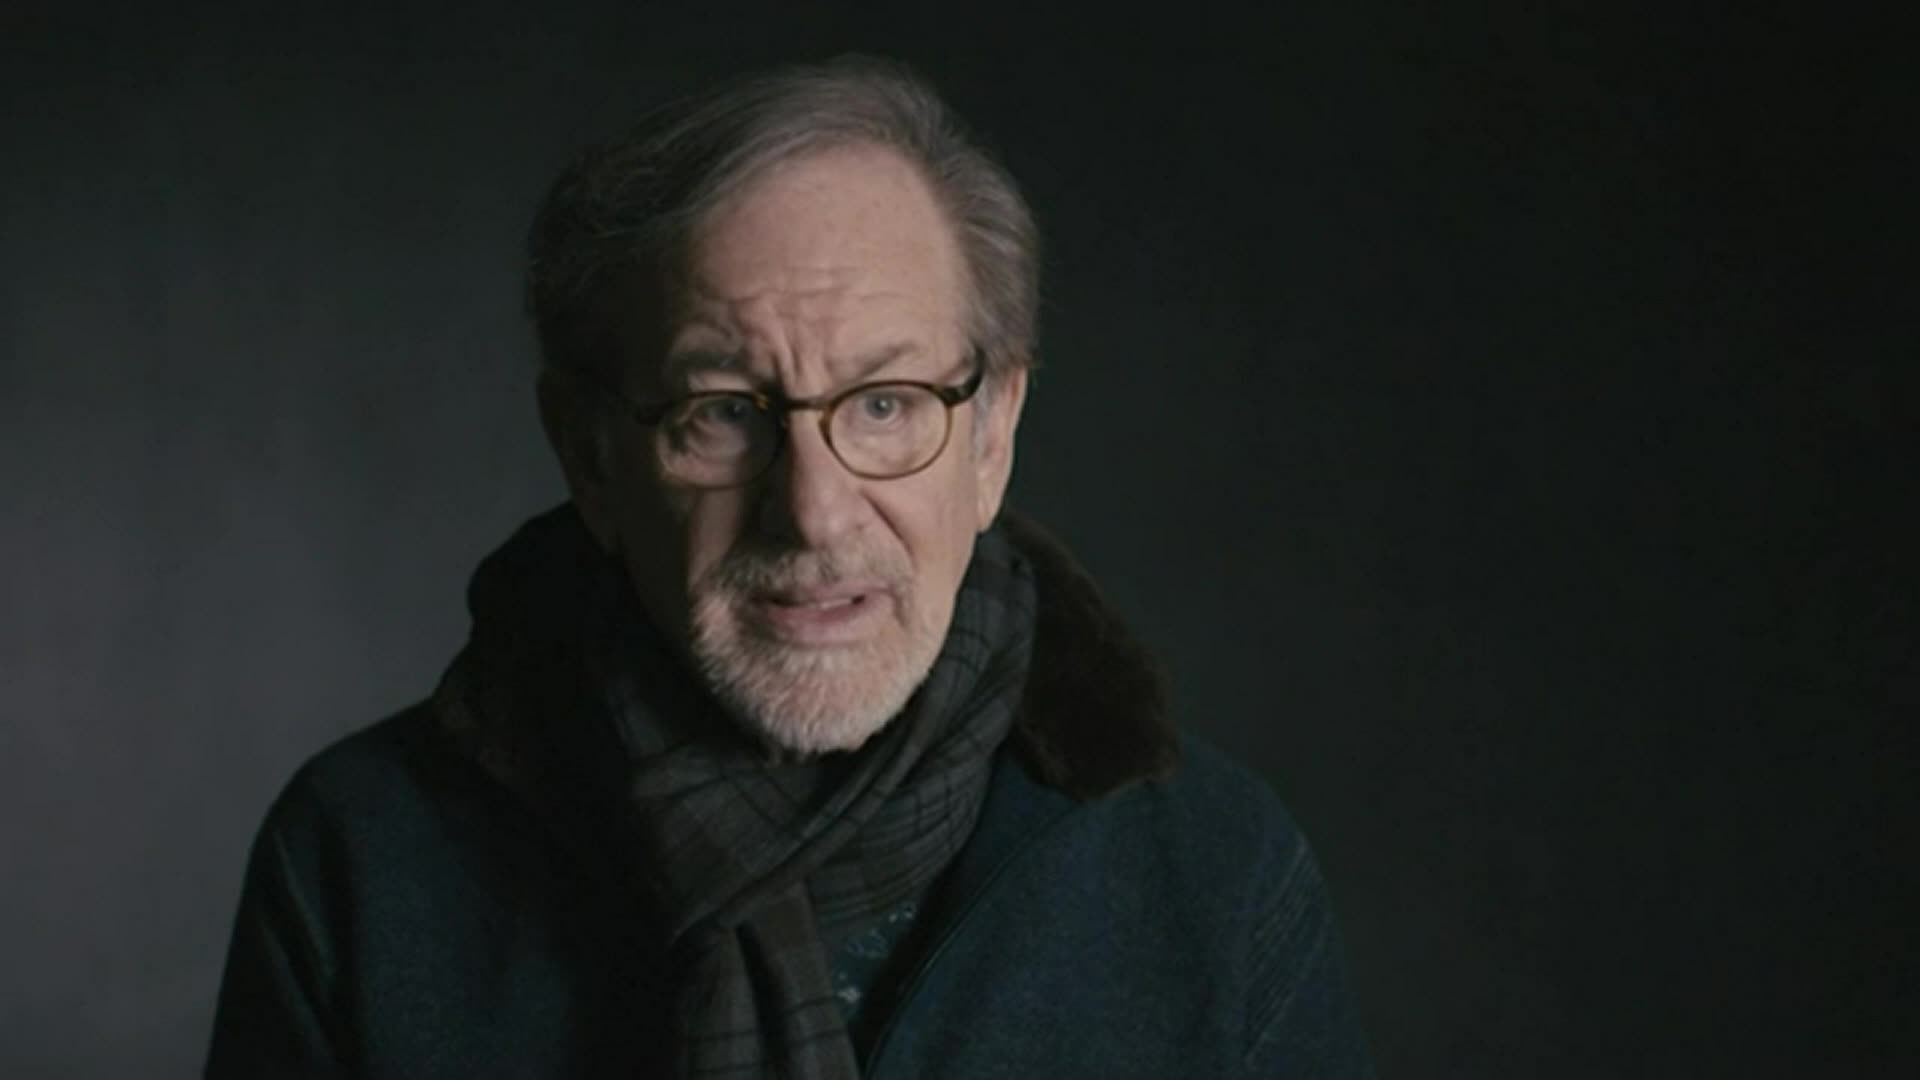 Steven Spielberg #39 s production company signs a deal with Netflix WNKY